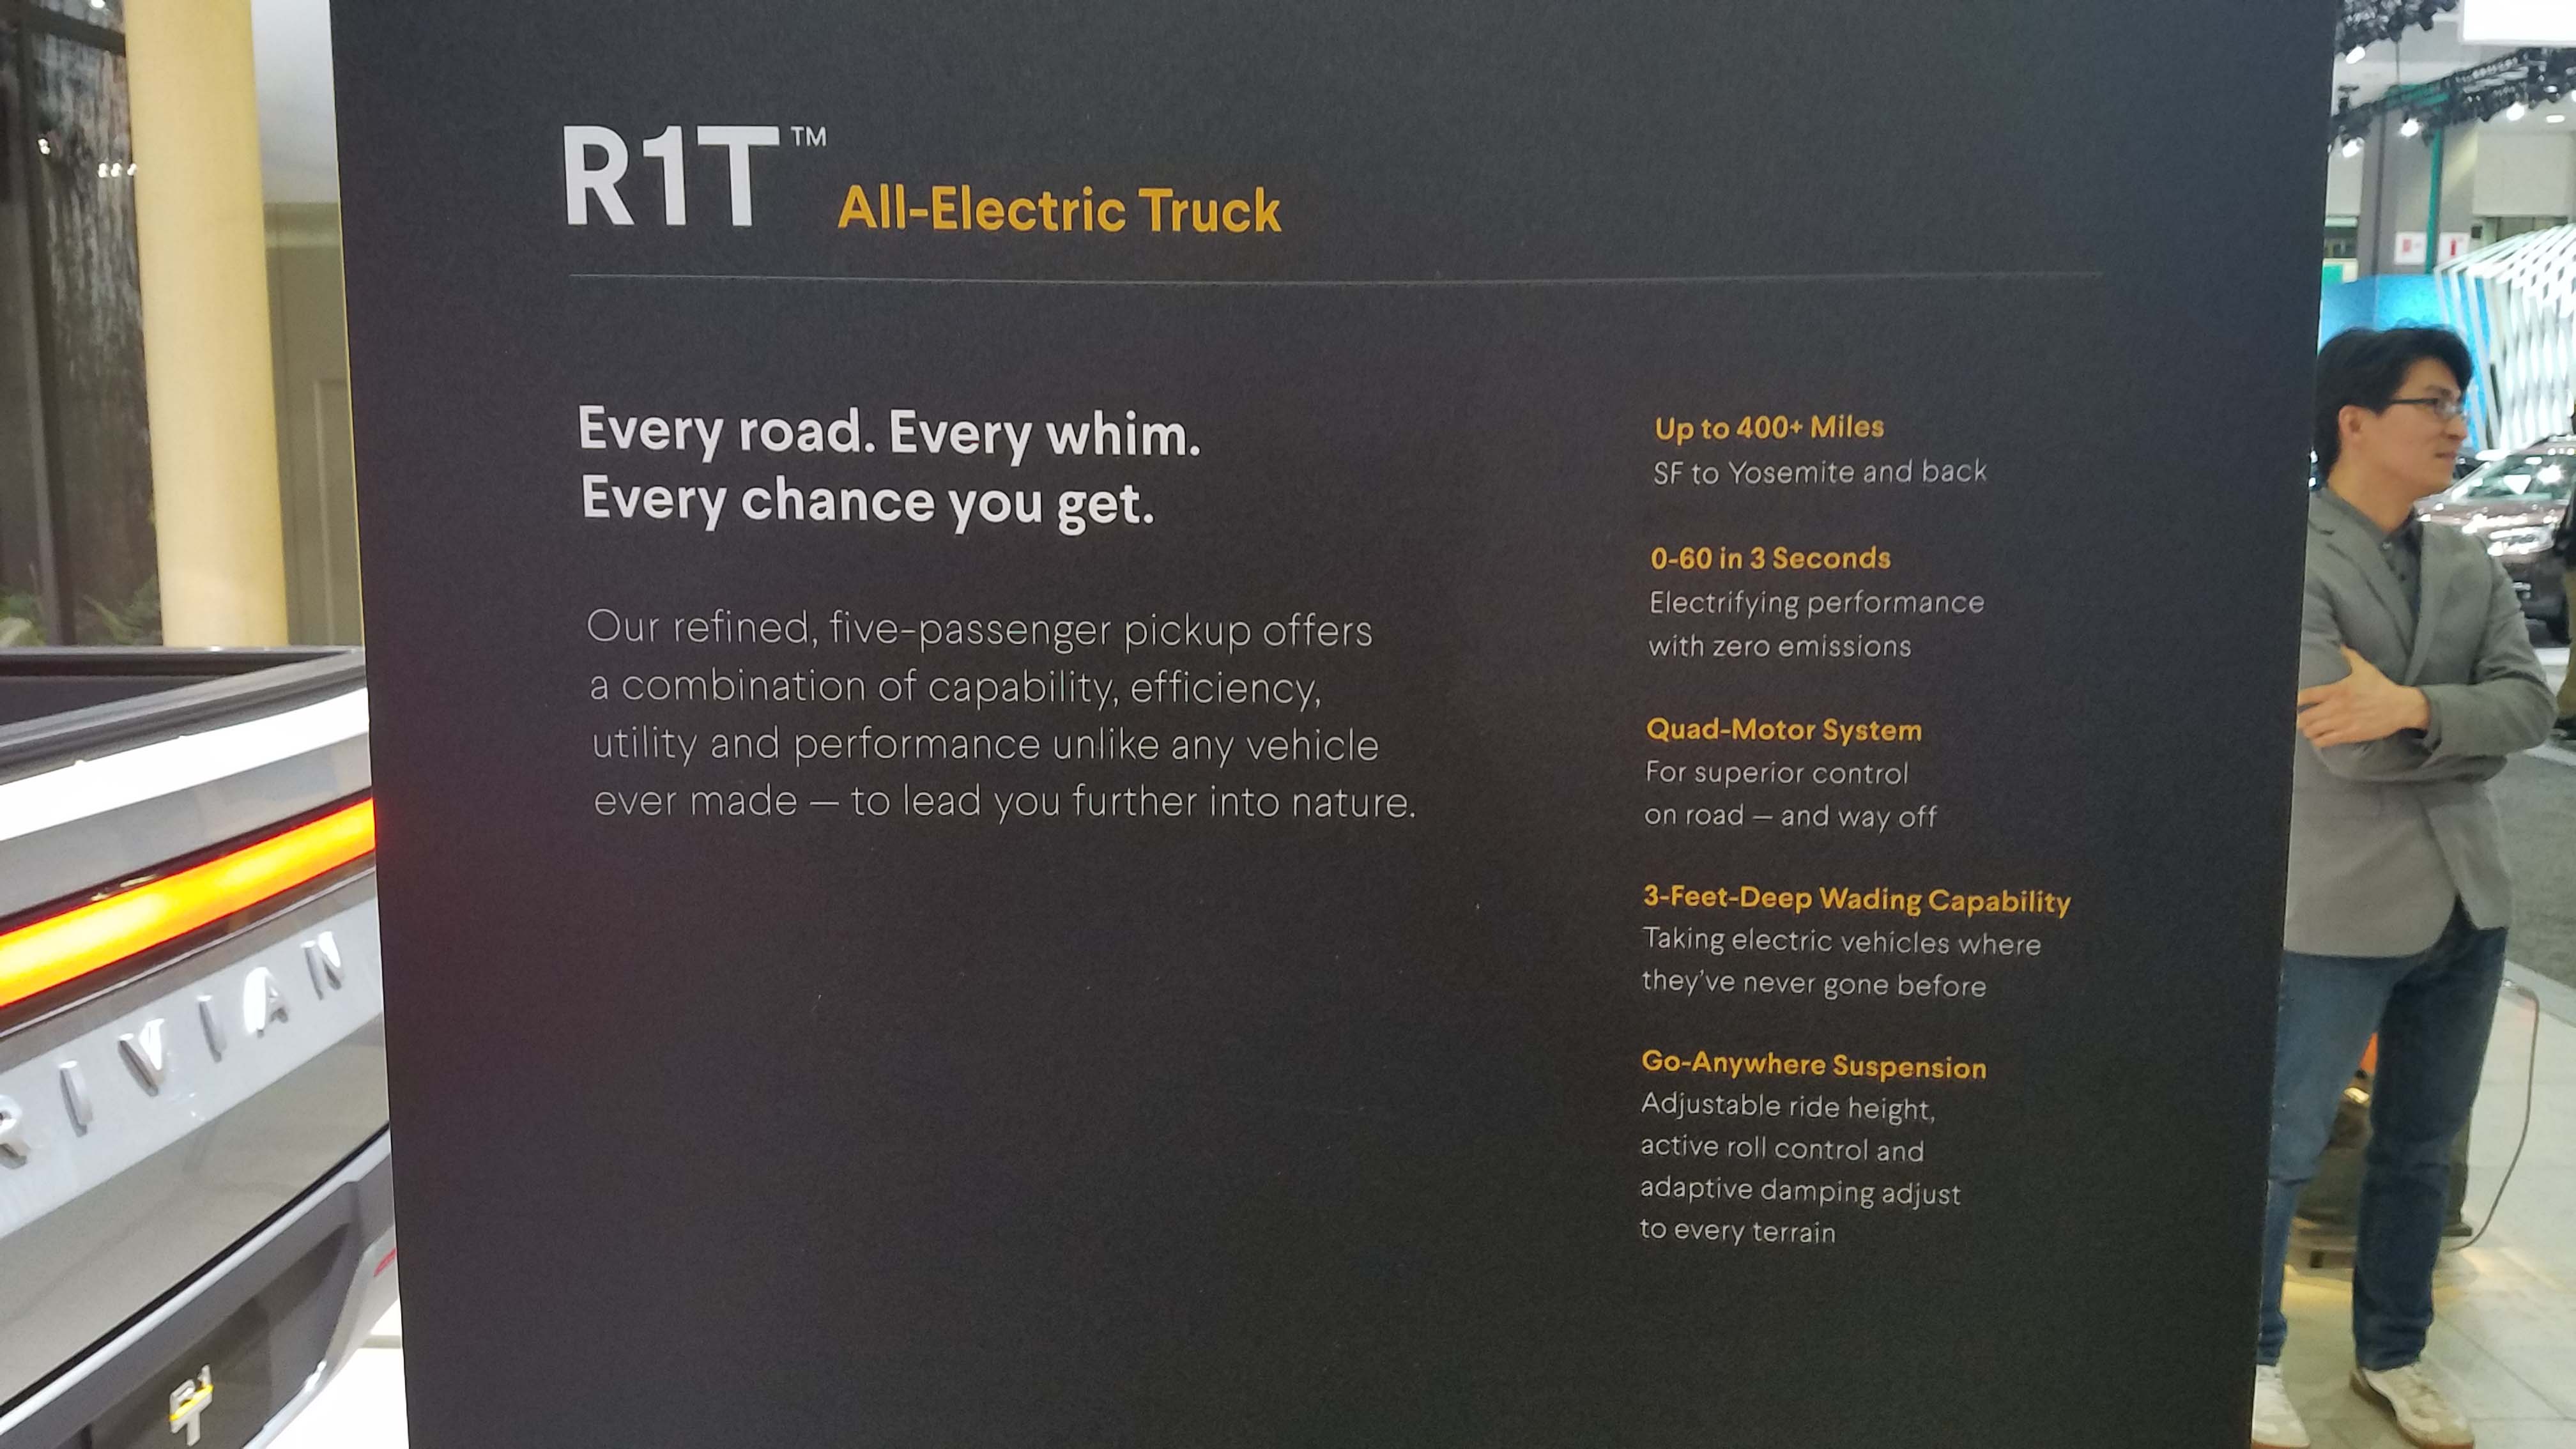 The specs of the Rivian R1T pickup are impressive, from its 3.0-second zero-60 dash to its 11,000-pound tow capacity.